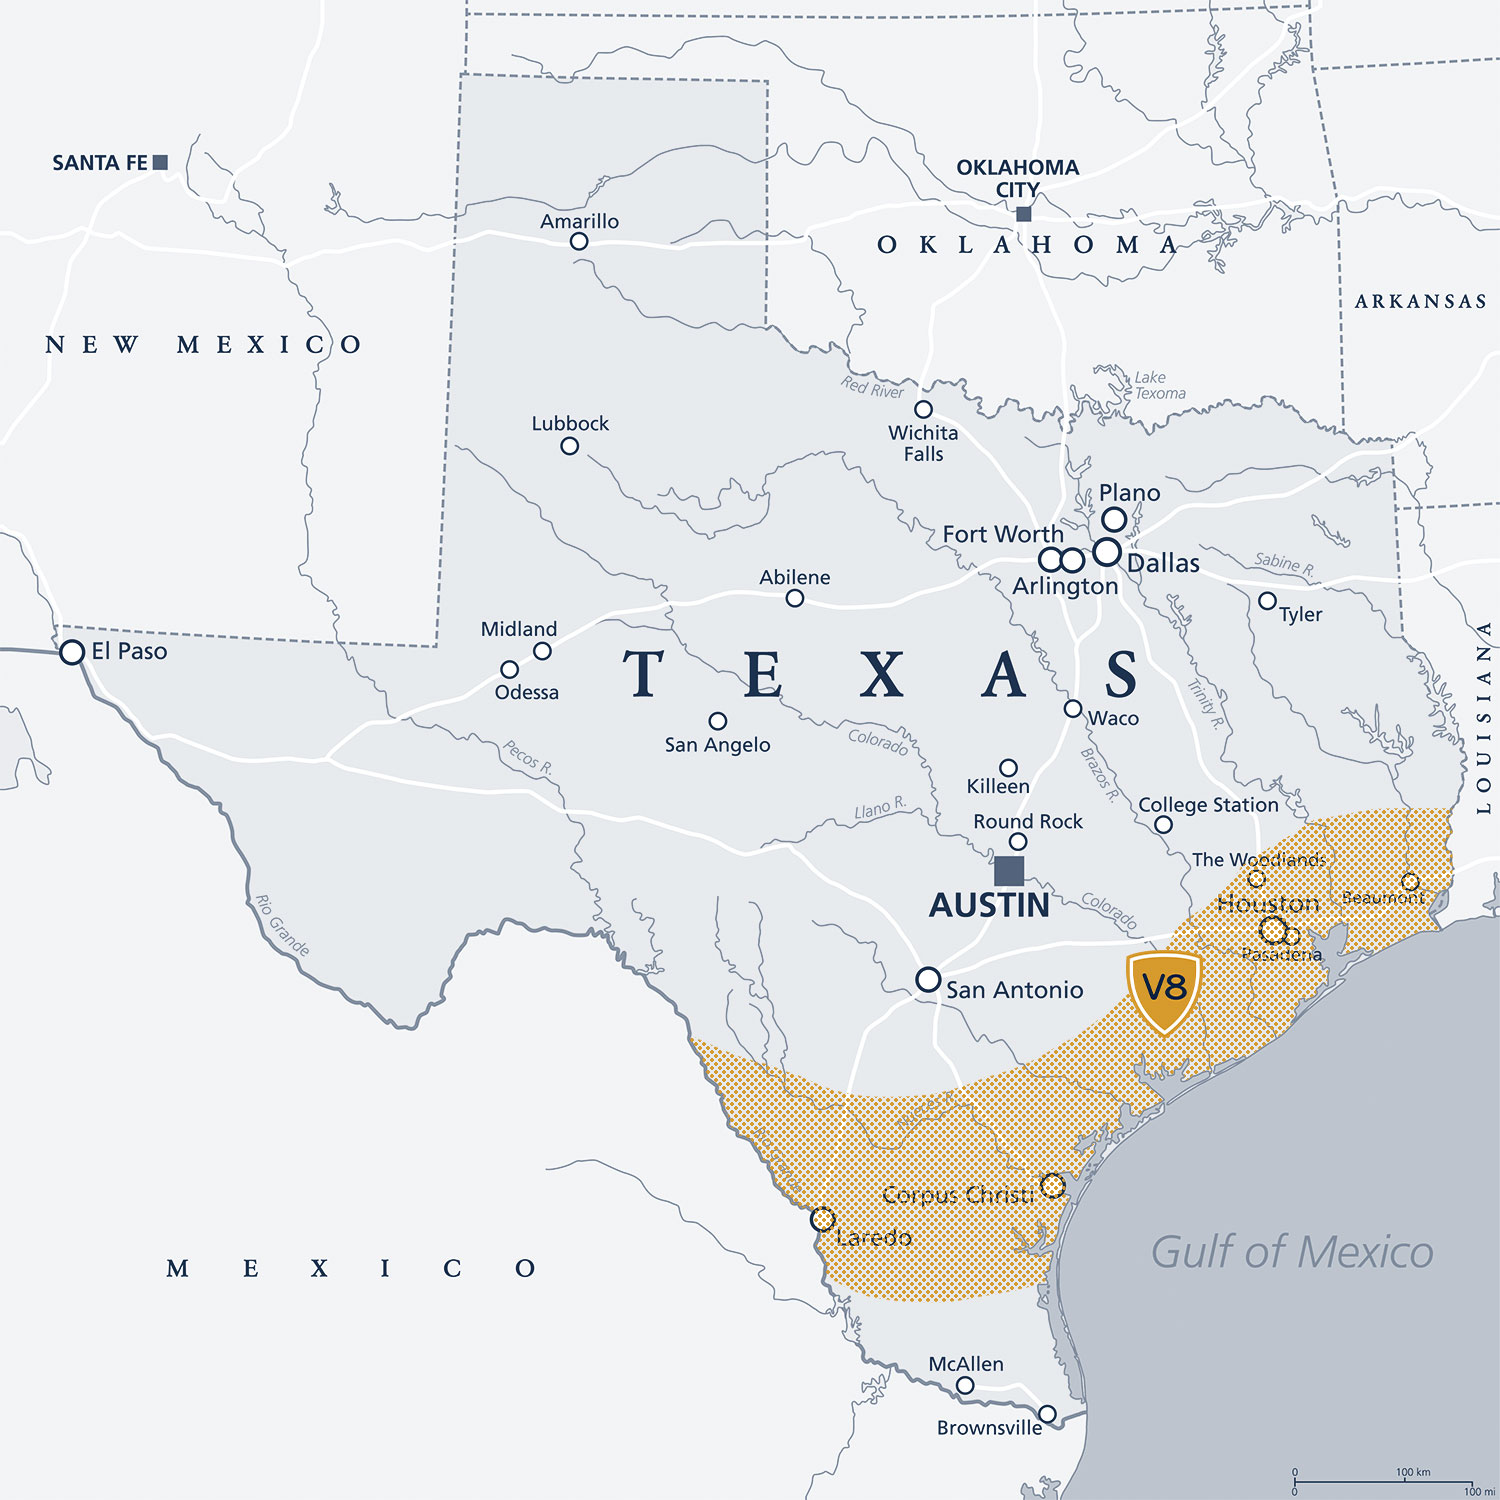 Where V8 is located on the Texas Map